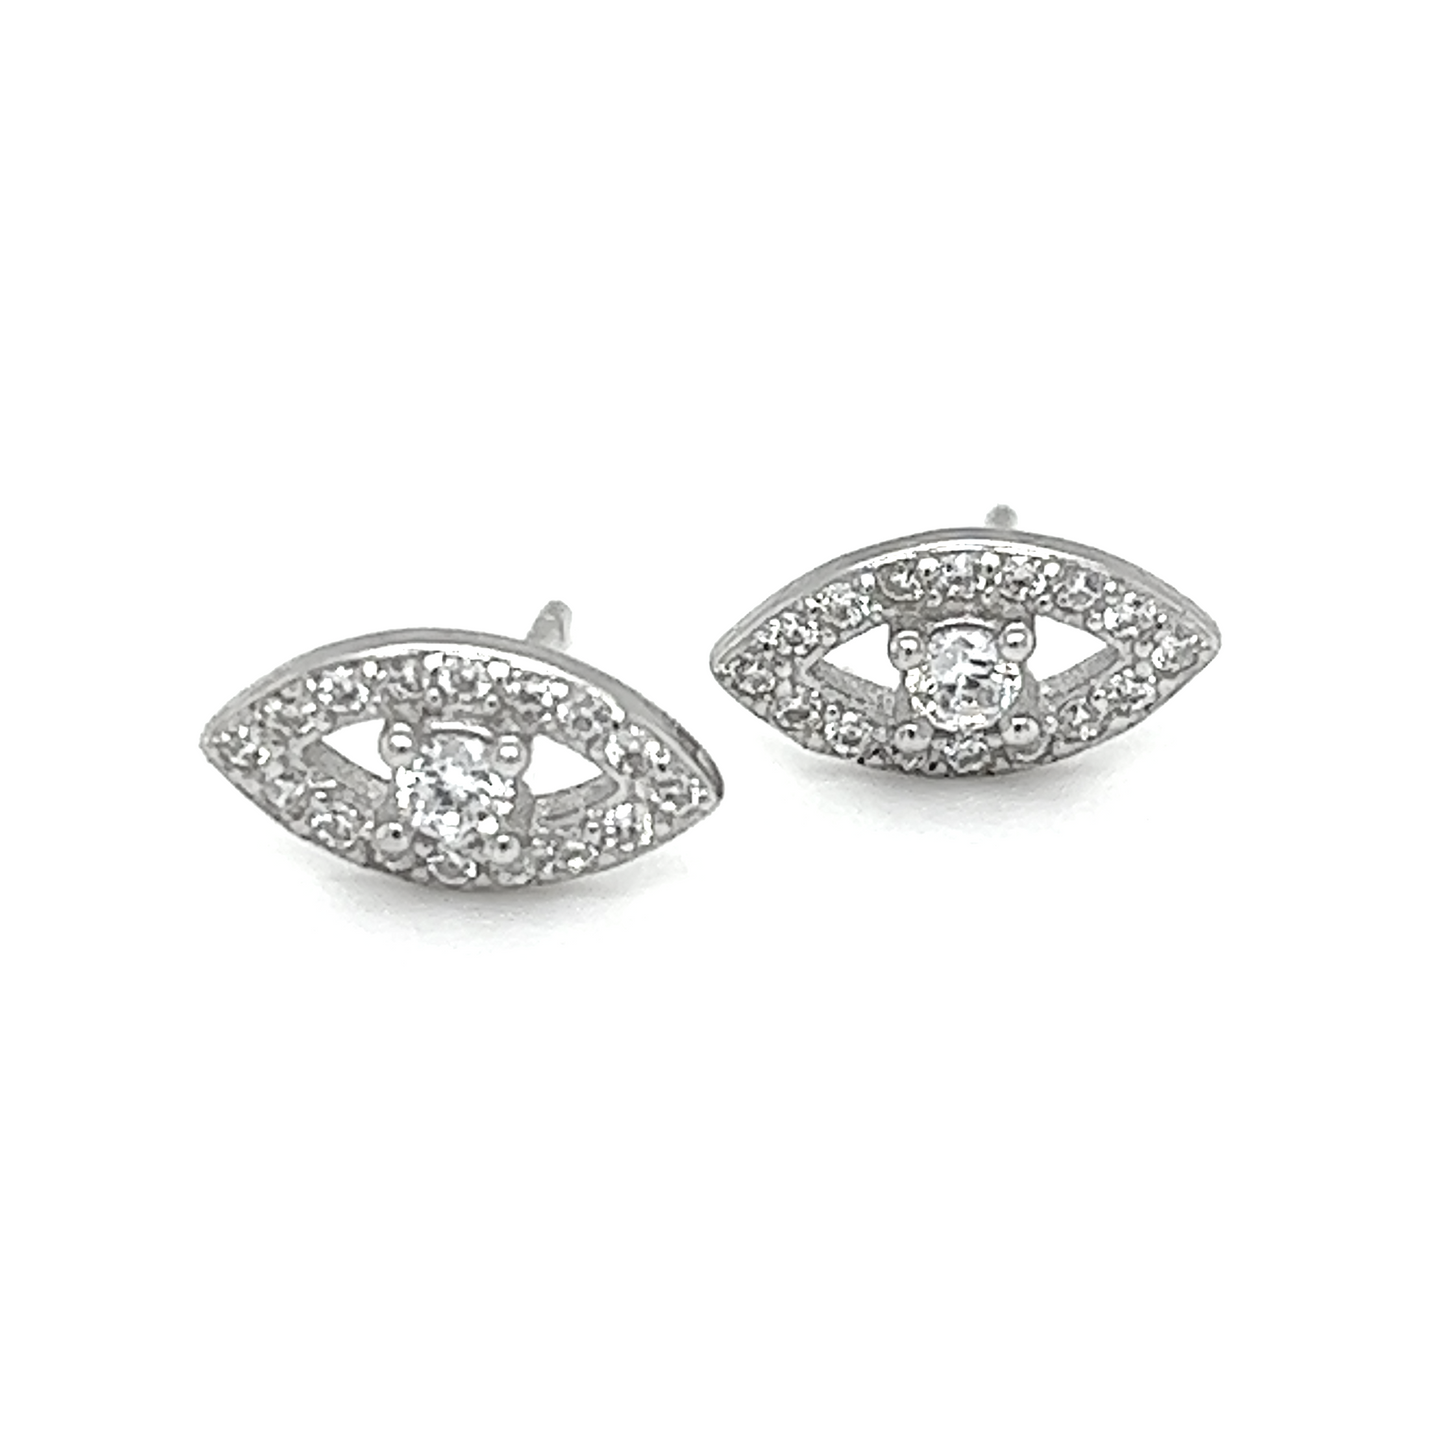 A pair of Super Silver CZ Eye Studs, adorned with cubic zirconia for added symbolism.